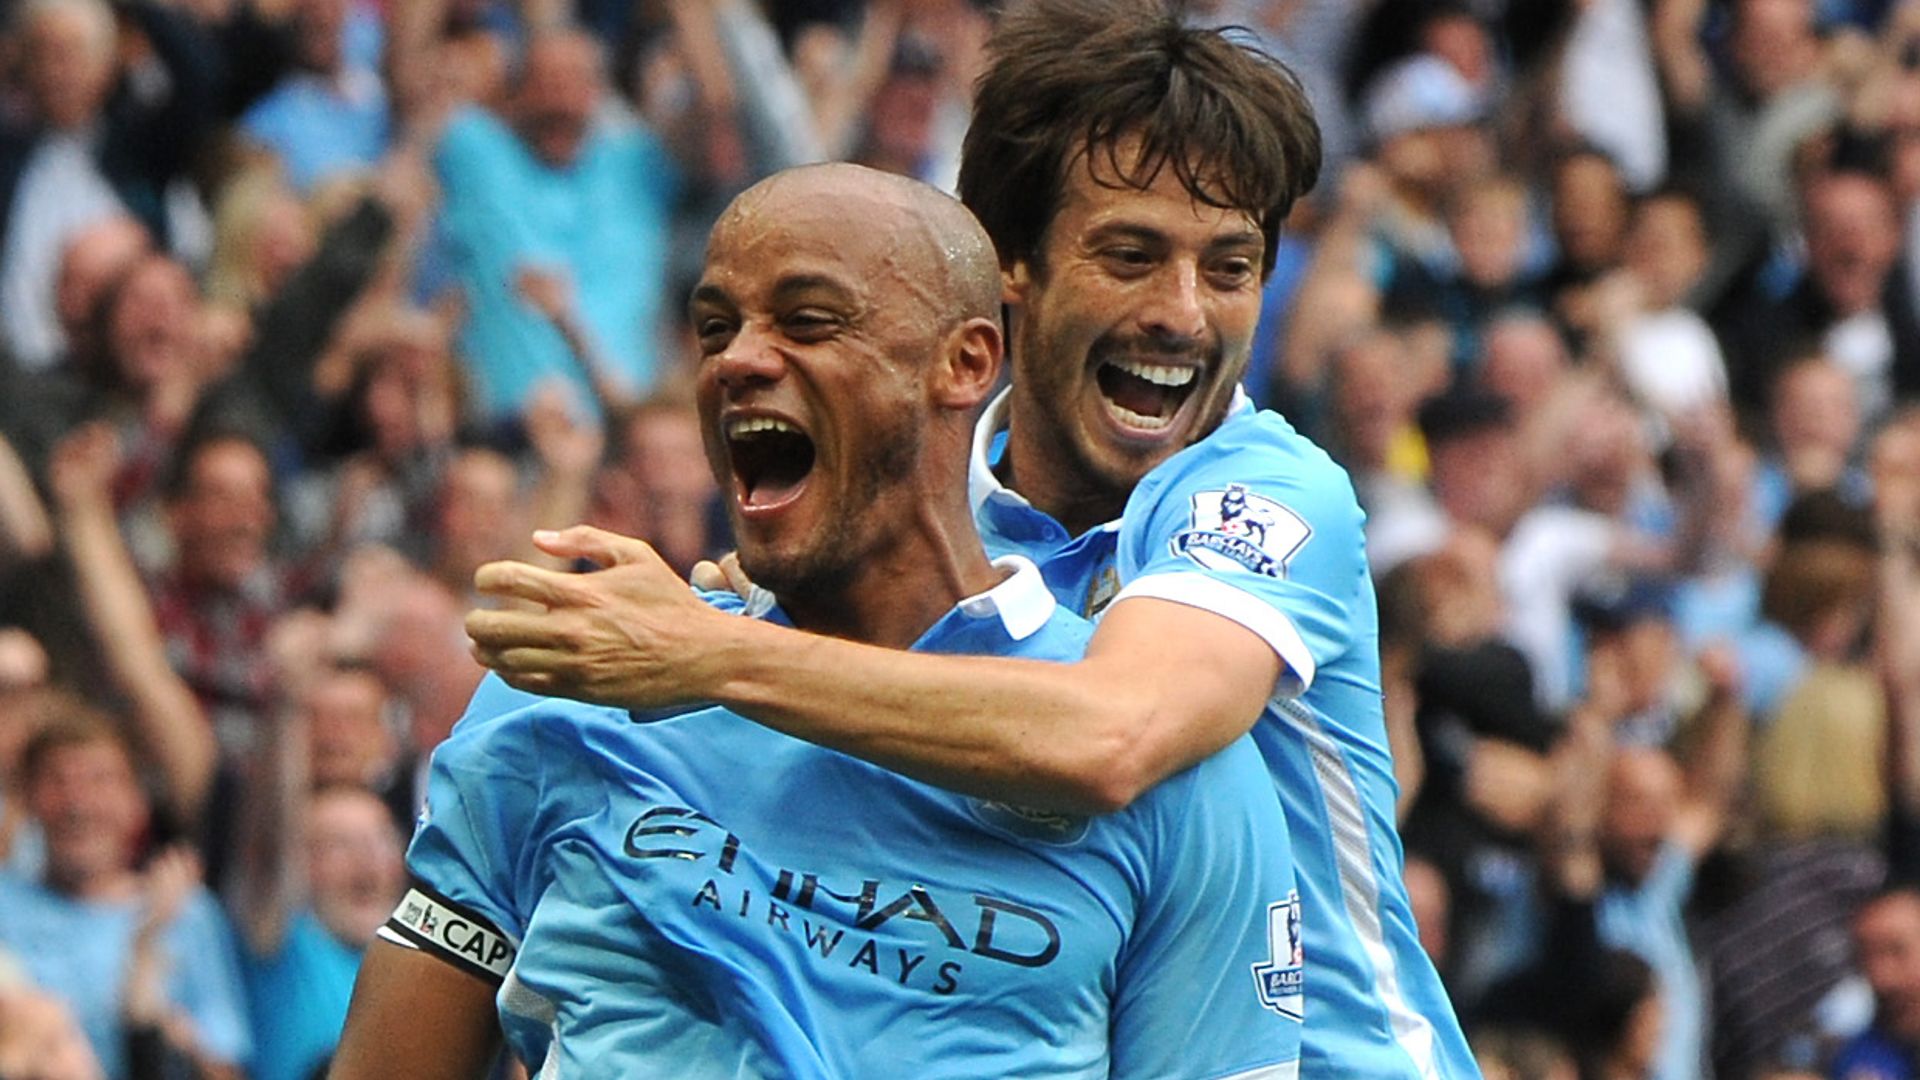 Man City to unveil Kompany and Silva statues before Arsenal game